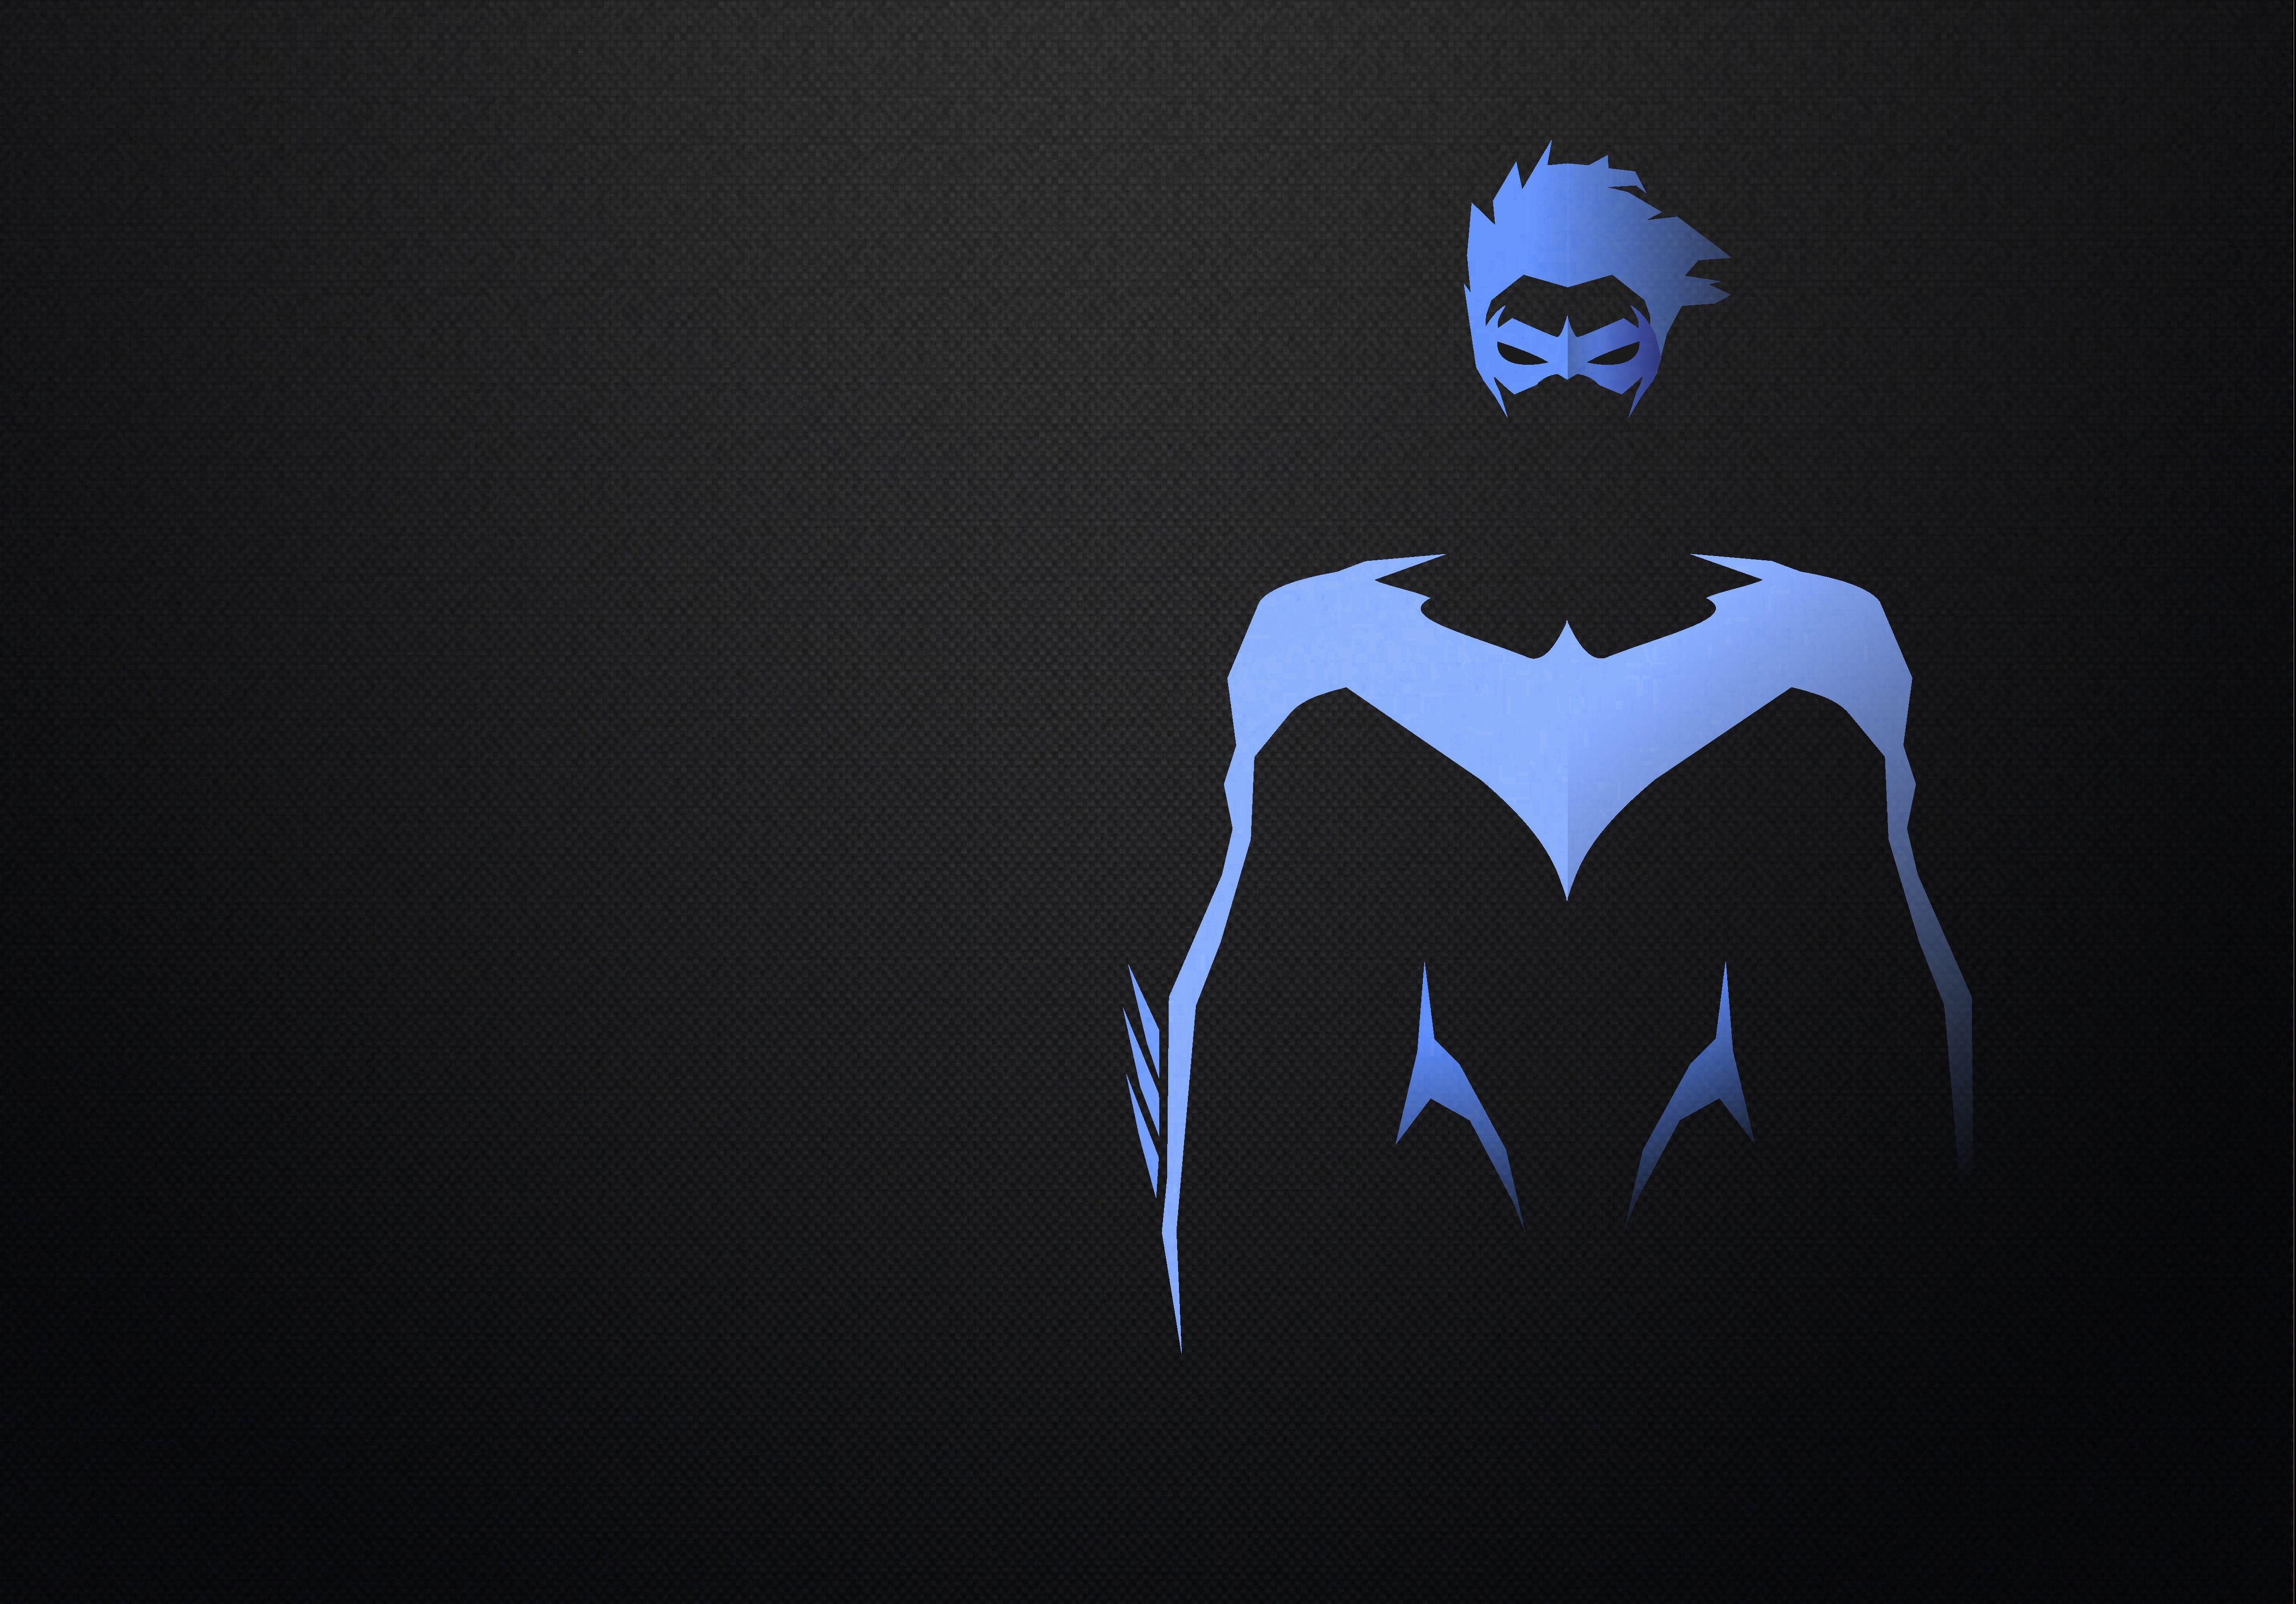 Nightwing Wallpapers - Top Free